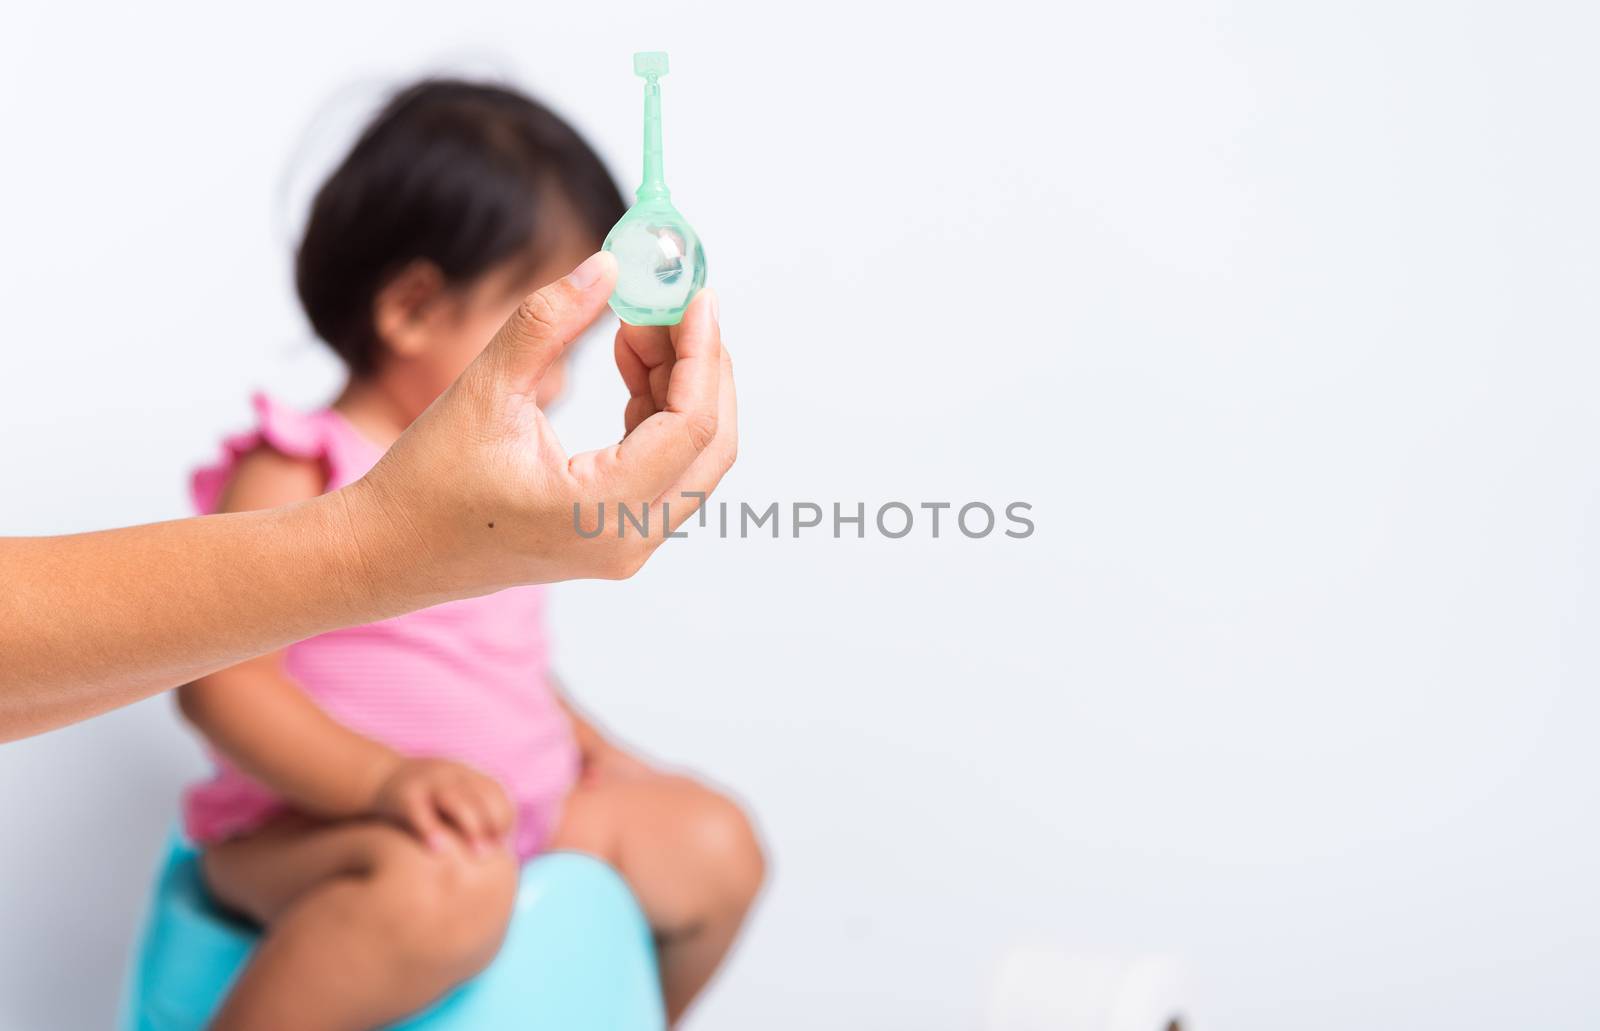 Asian little cute baby child girl training to sitting on blue chamber pot or potty her problem cannot shit and mother use Enema for help, studio shot isolated on white background, wc toilet concept